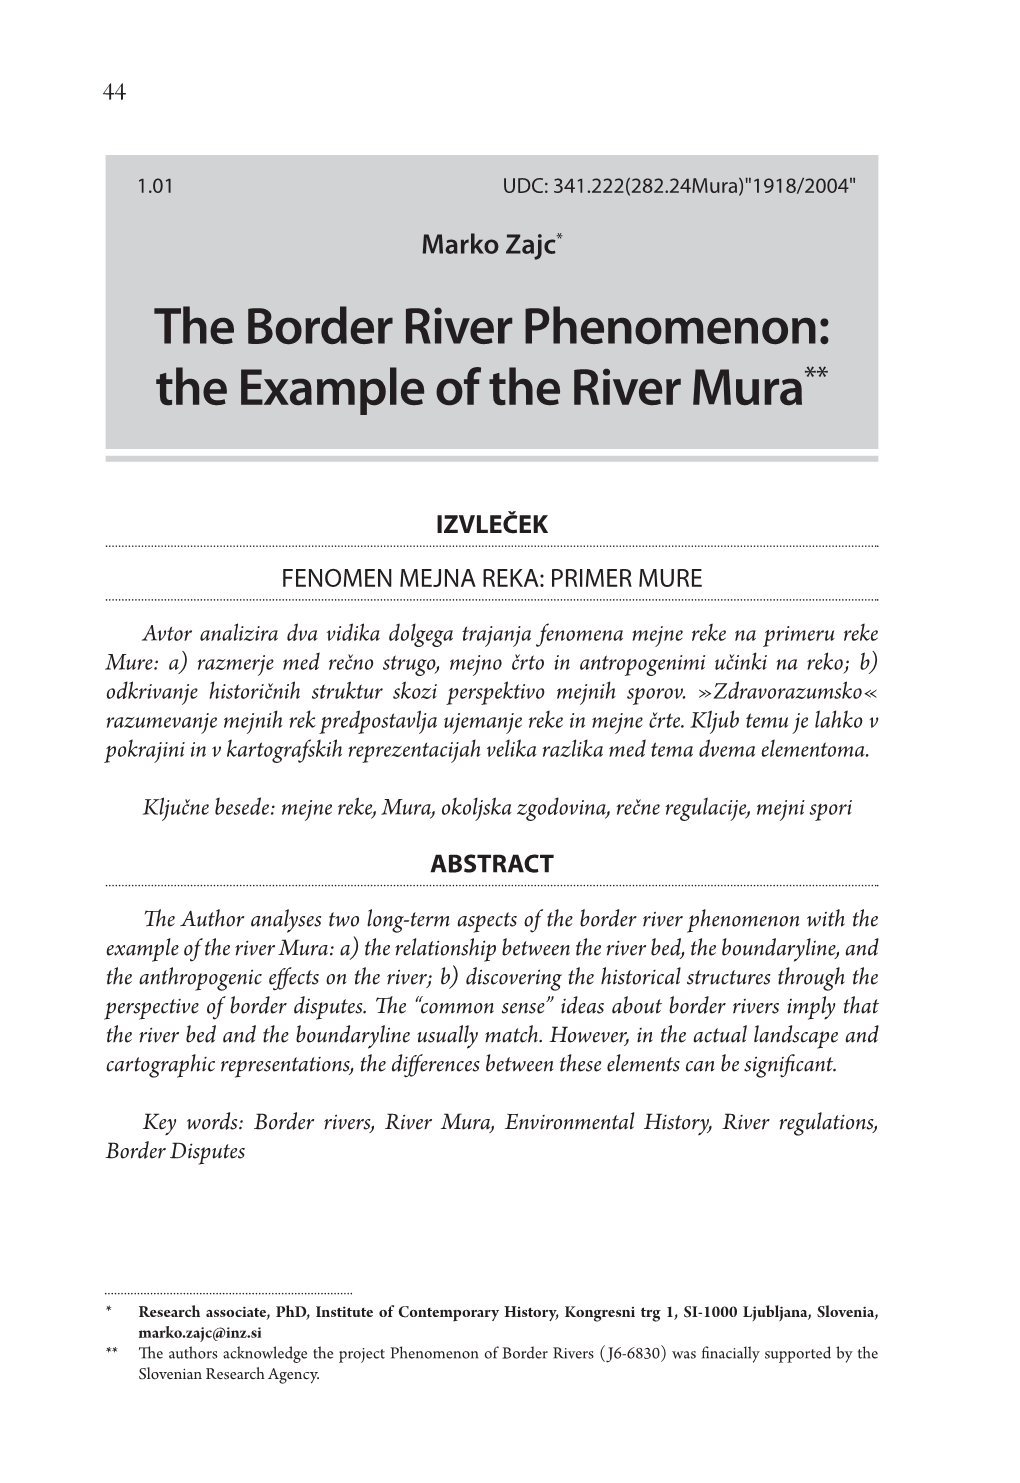 The Example of the River Mura**